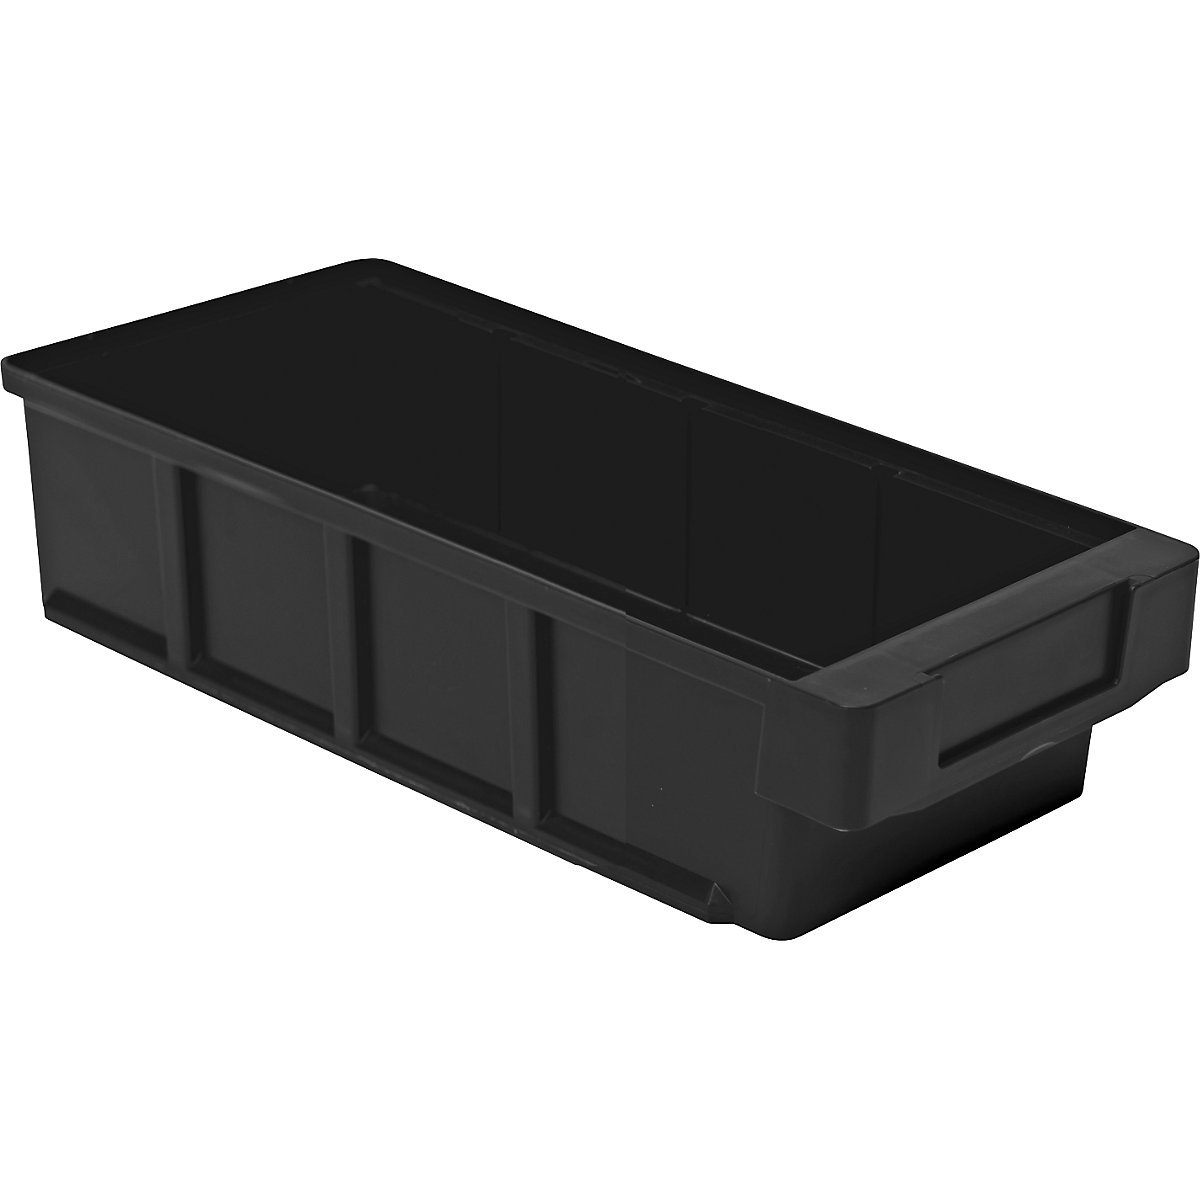 ESD small parts box, made of polypropylene, LxWxH 600 x 152 x 83 mm, pack of 10-3